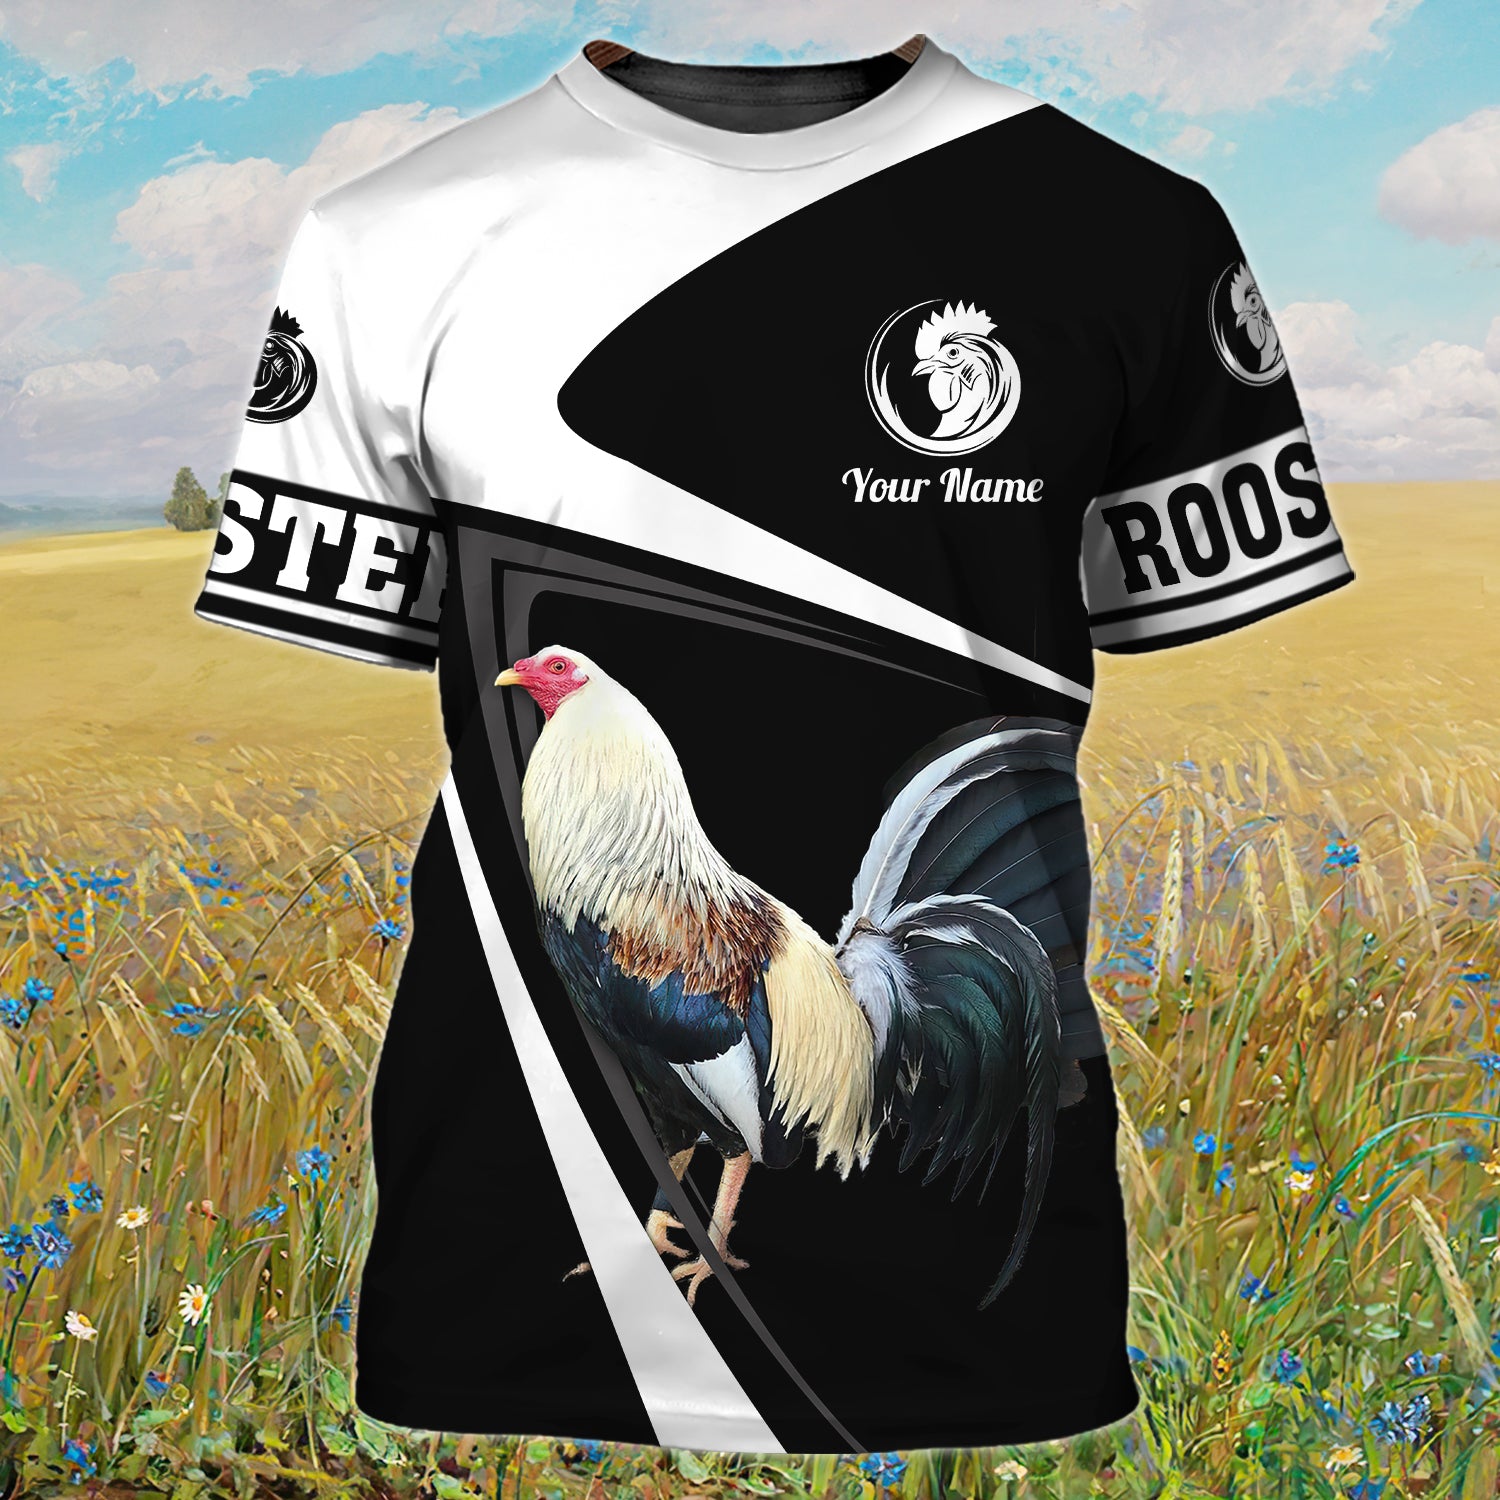 Rooster 1 - Personalized Name 3D Tshirt 132 - Bhn97